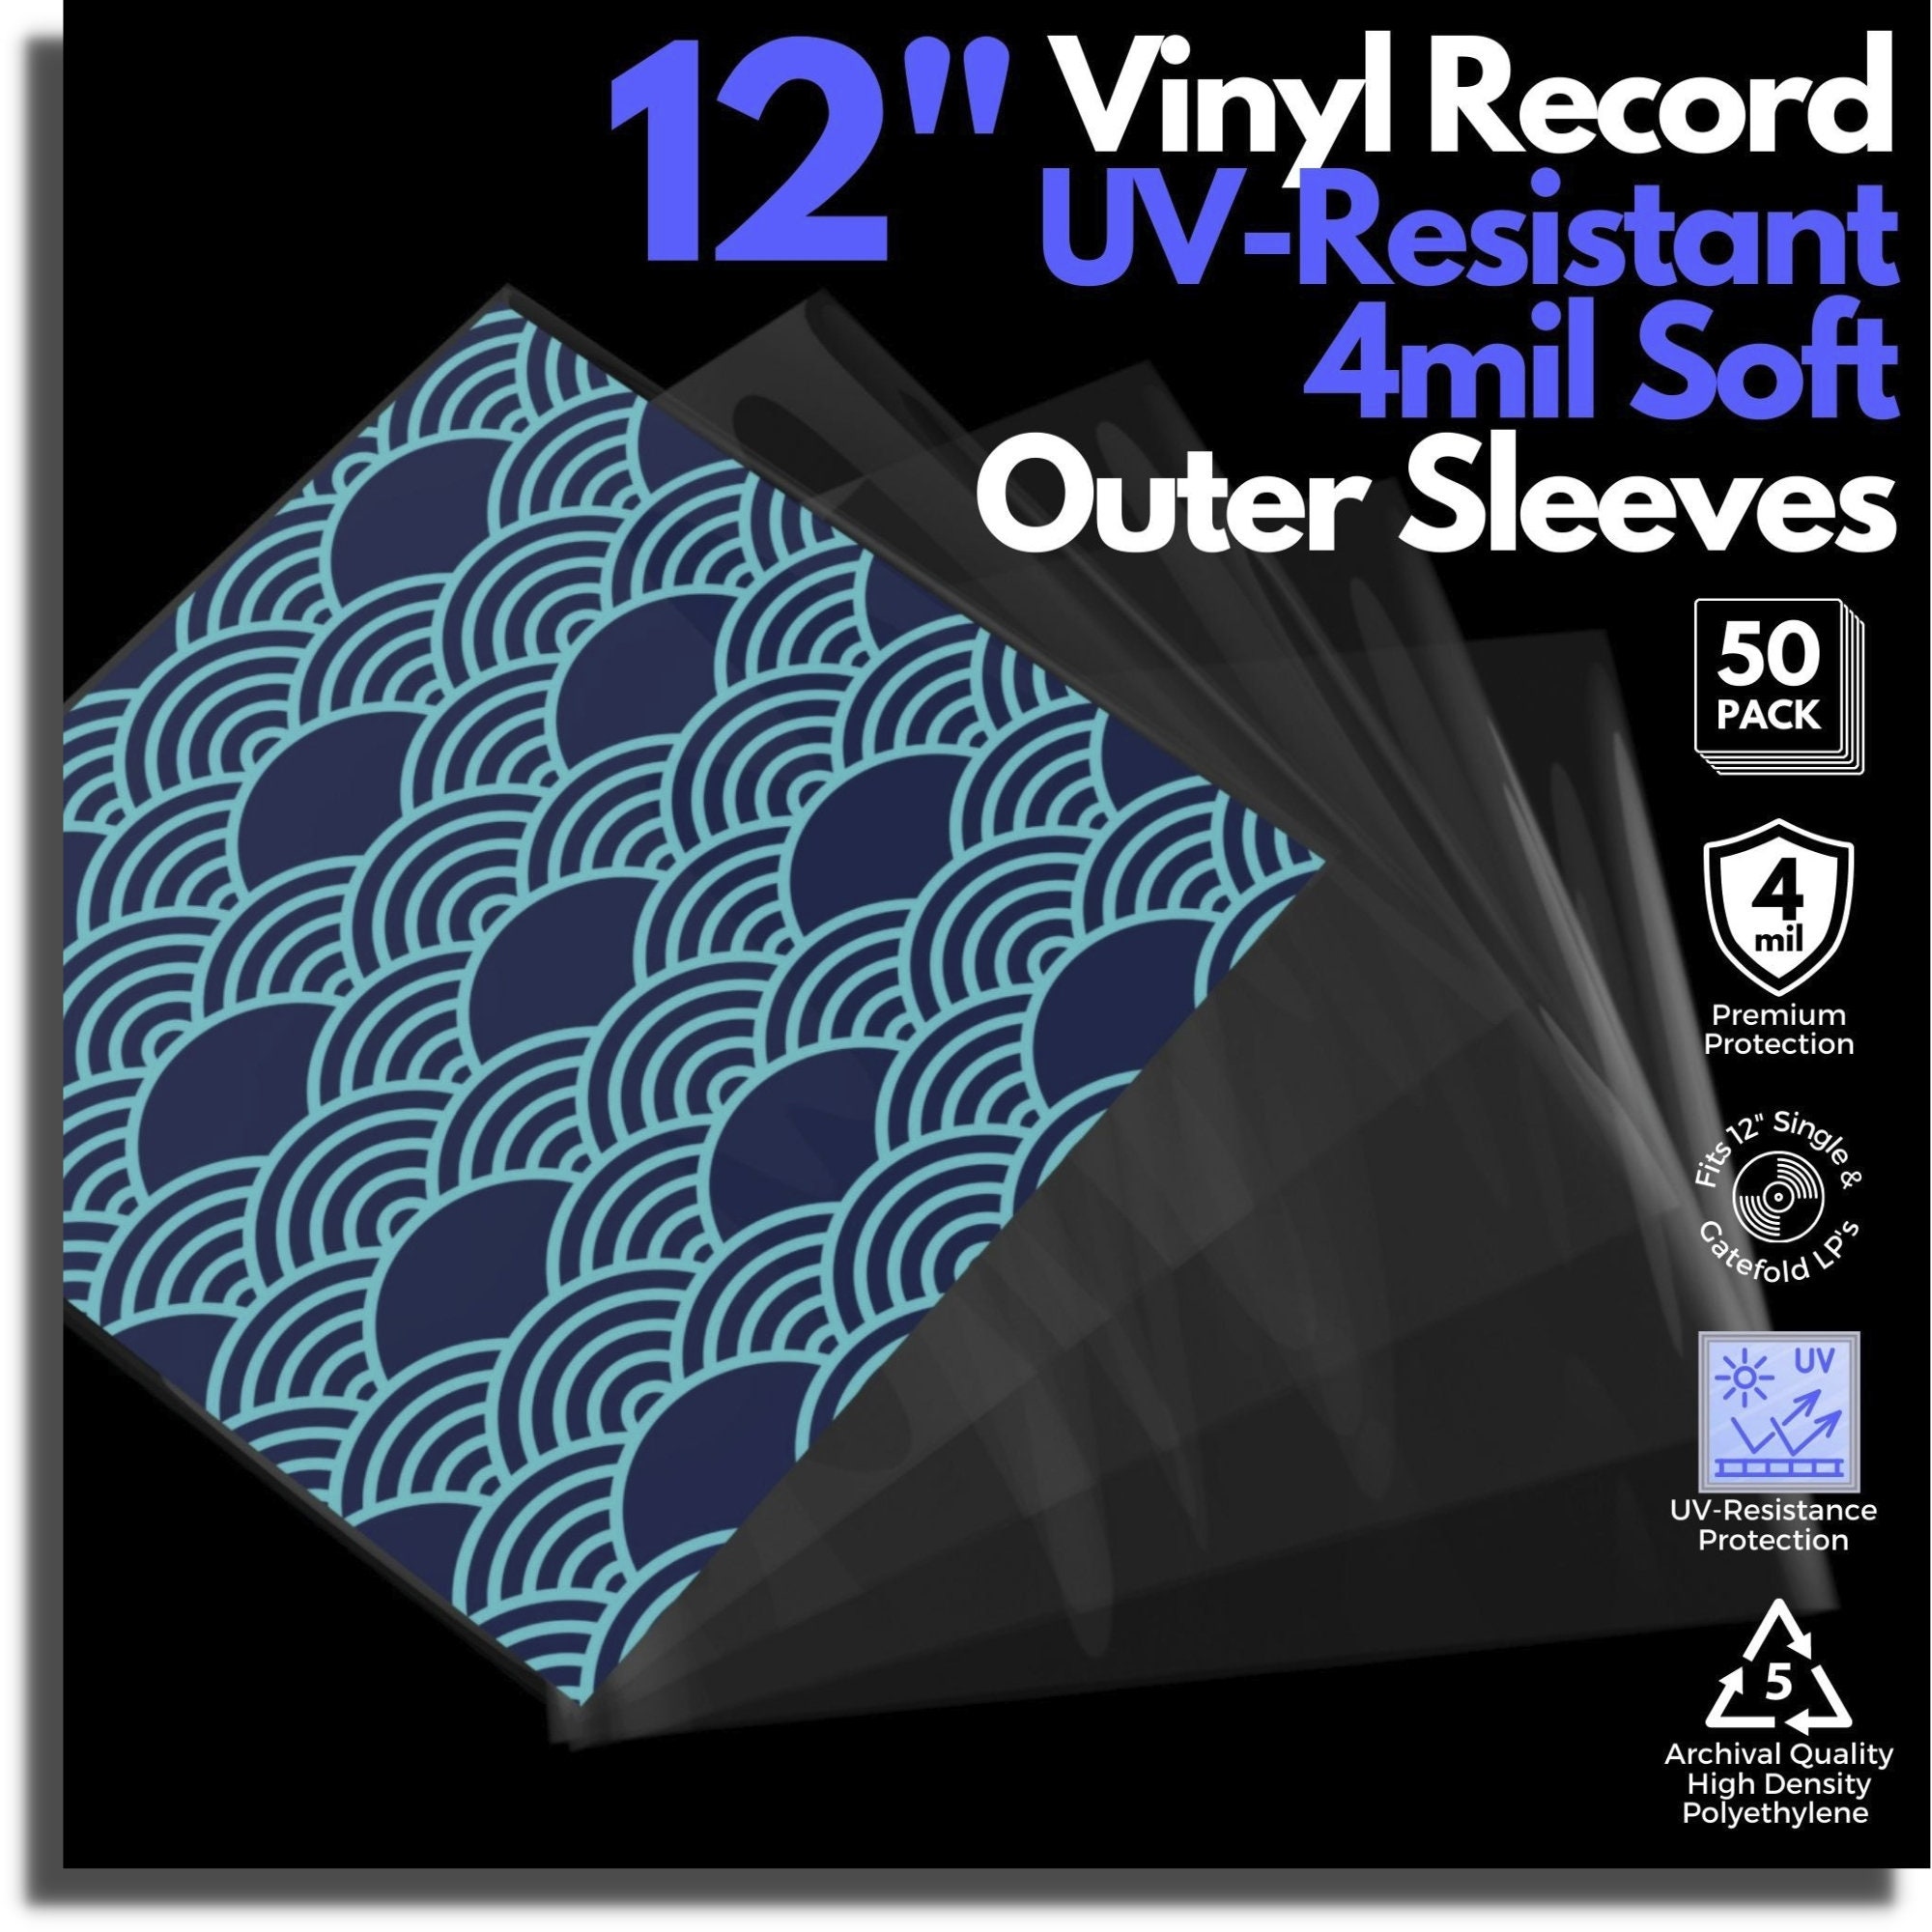 Invest In Vinyl 100 Clear Plastic Protective LP Outer Sleeves 3 Mil. Vinyl  Record Sleeves Album Covers 12.75 x 12.5 Provide Your LP Collection with